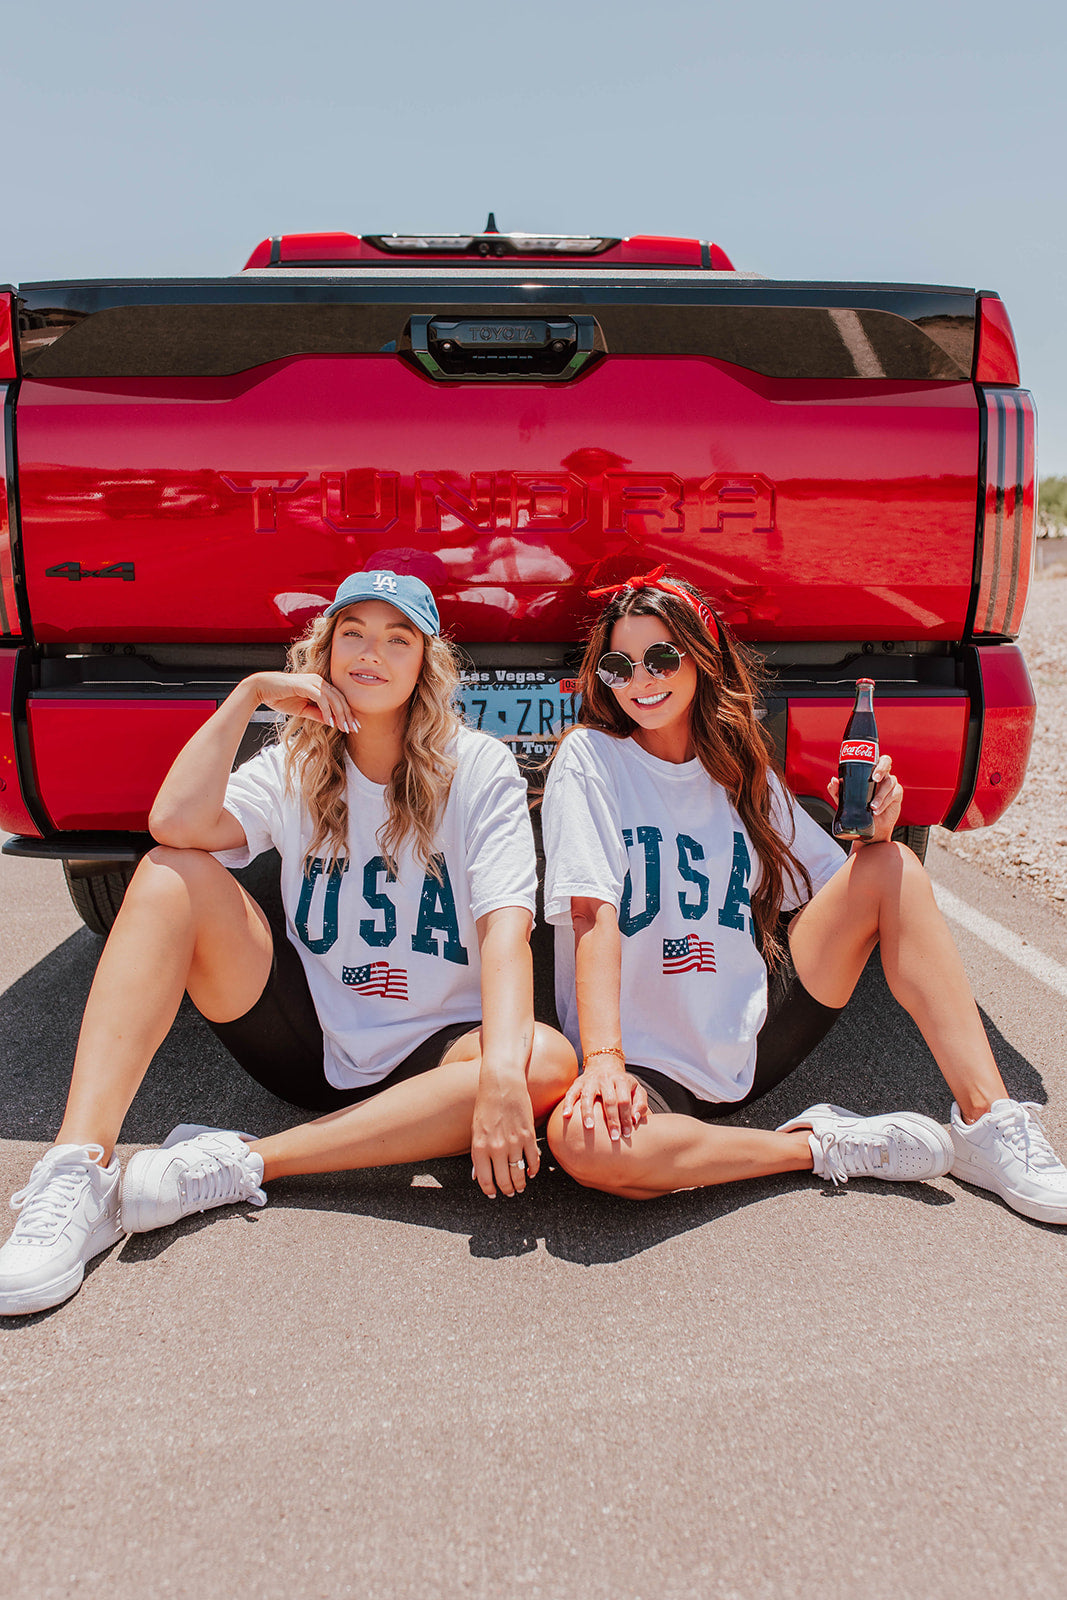 THE USA FLAG TEE IN WHITE BY PINK DESERT